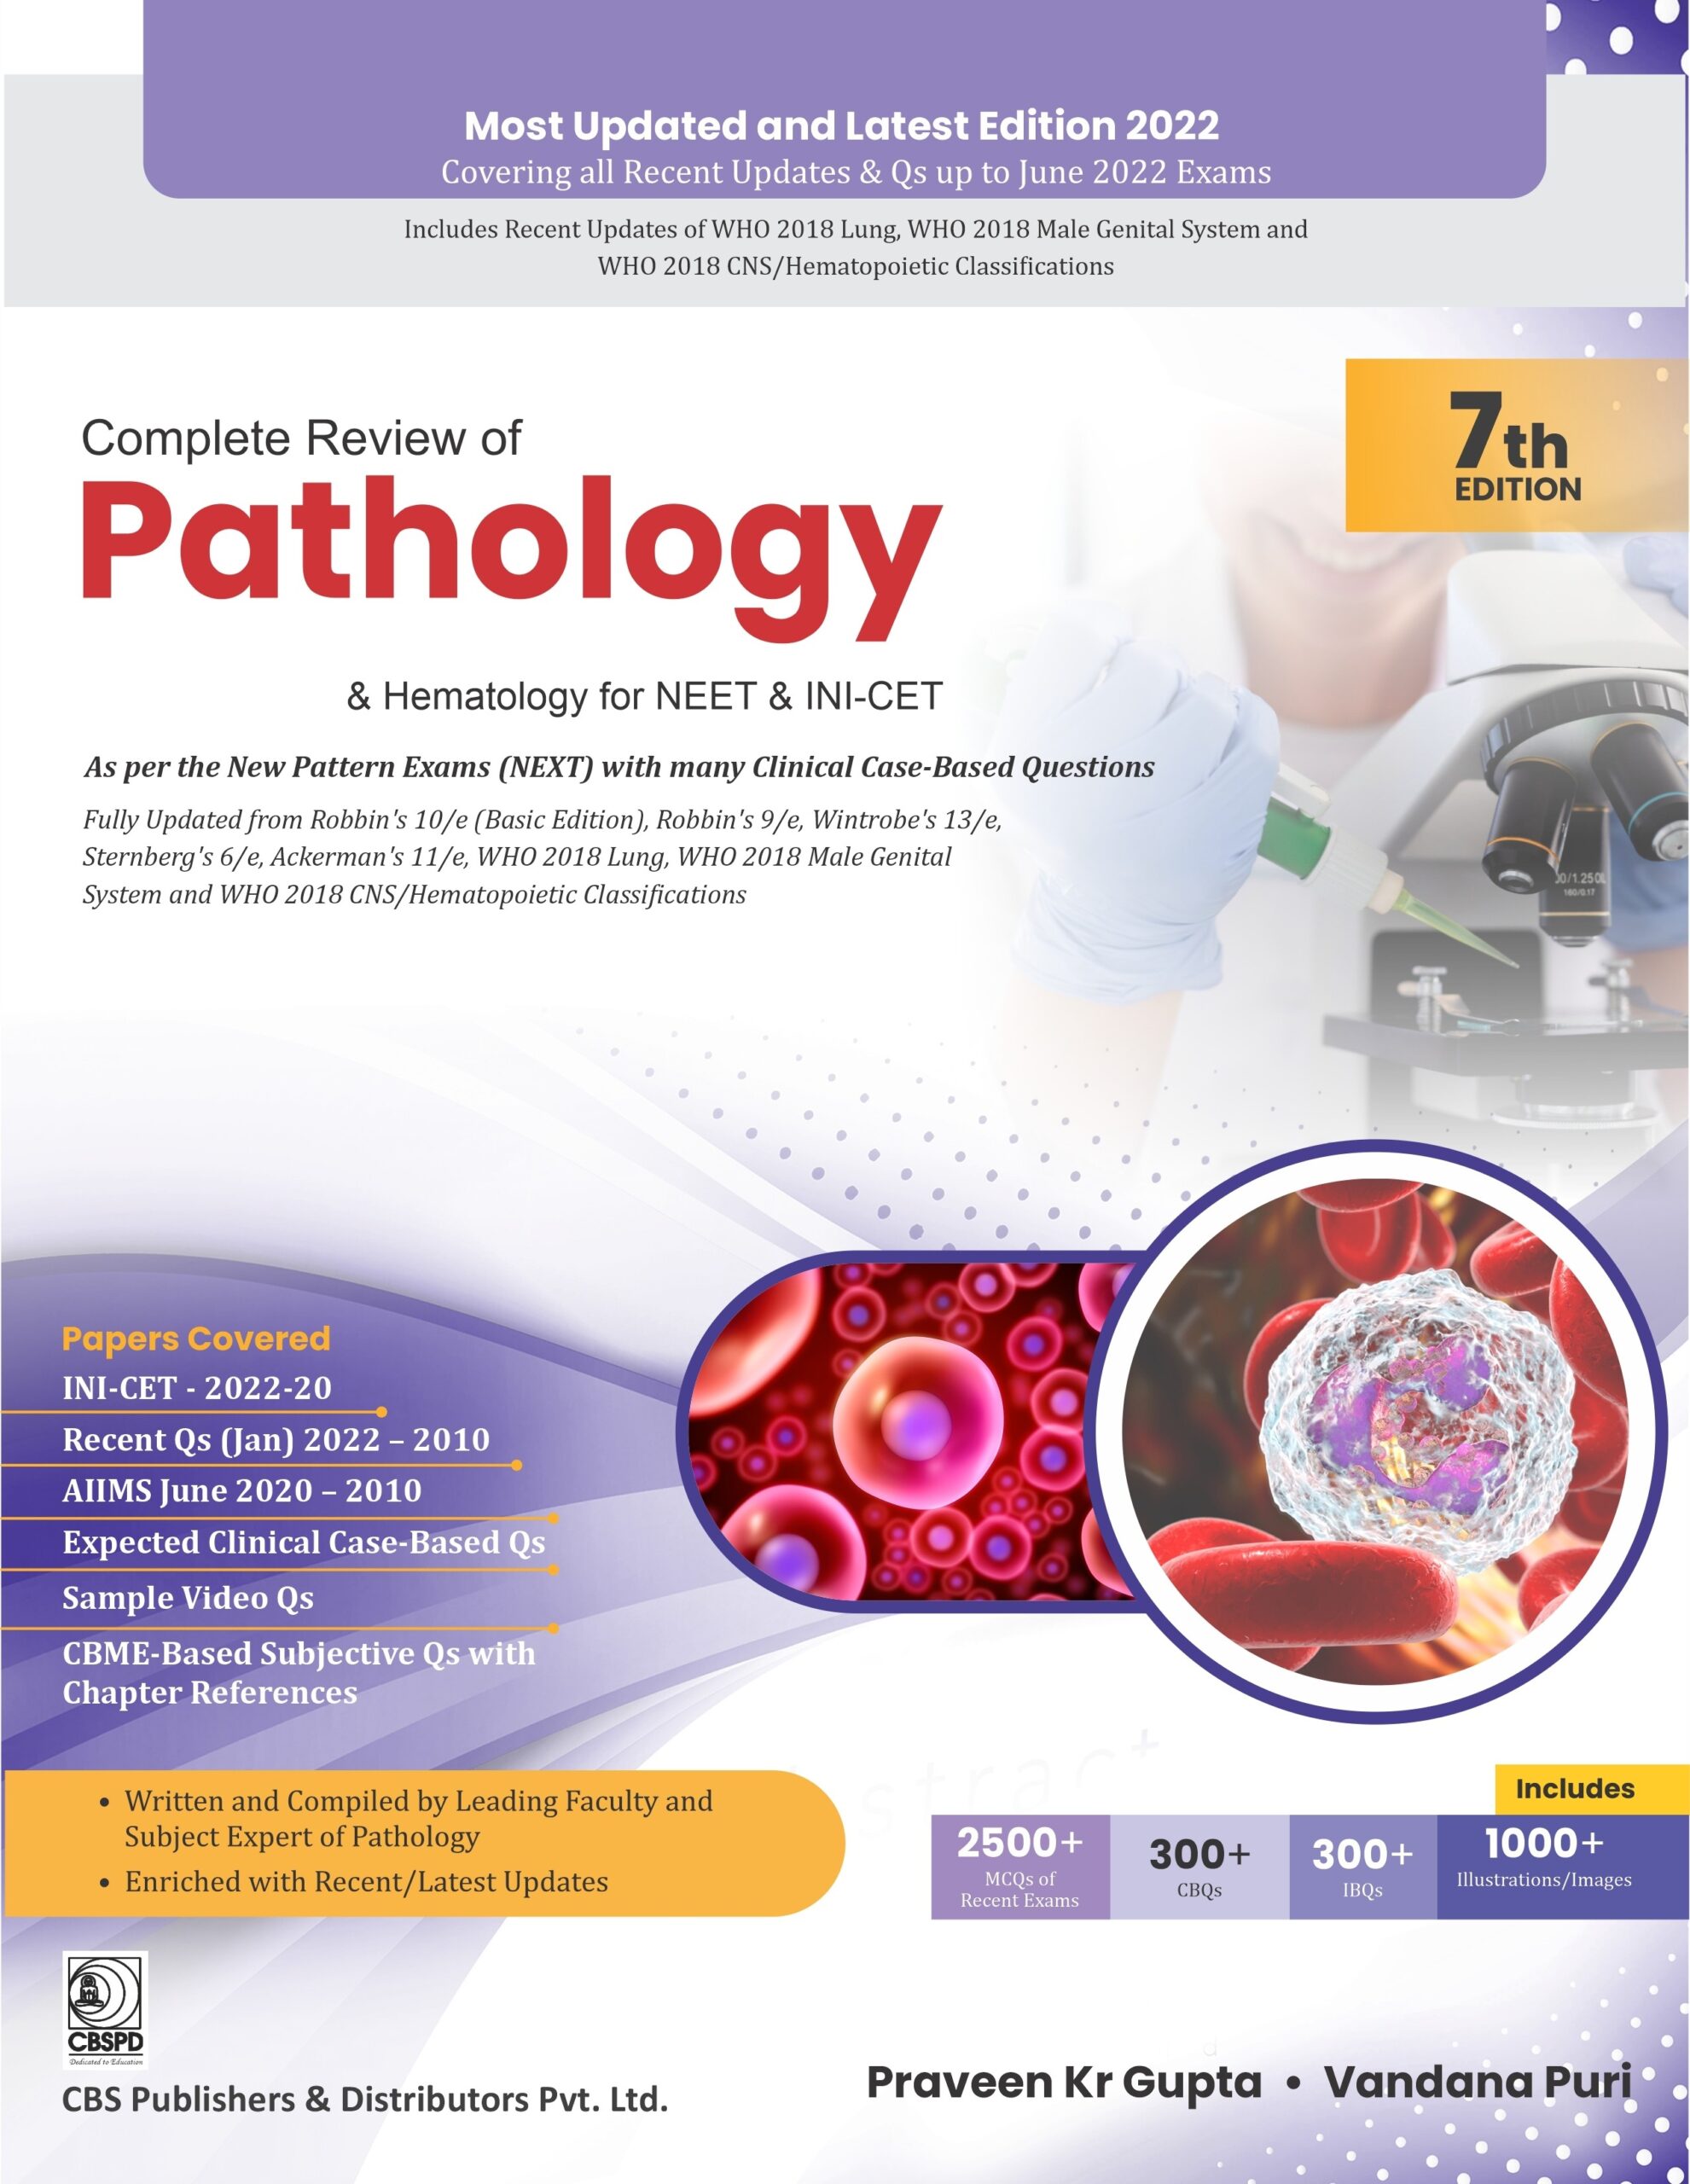 Complete Review of Pathology & Hematology for NEET